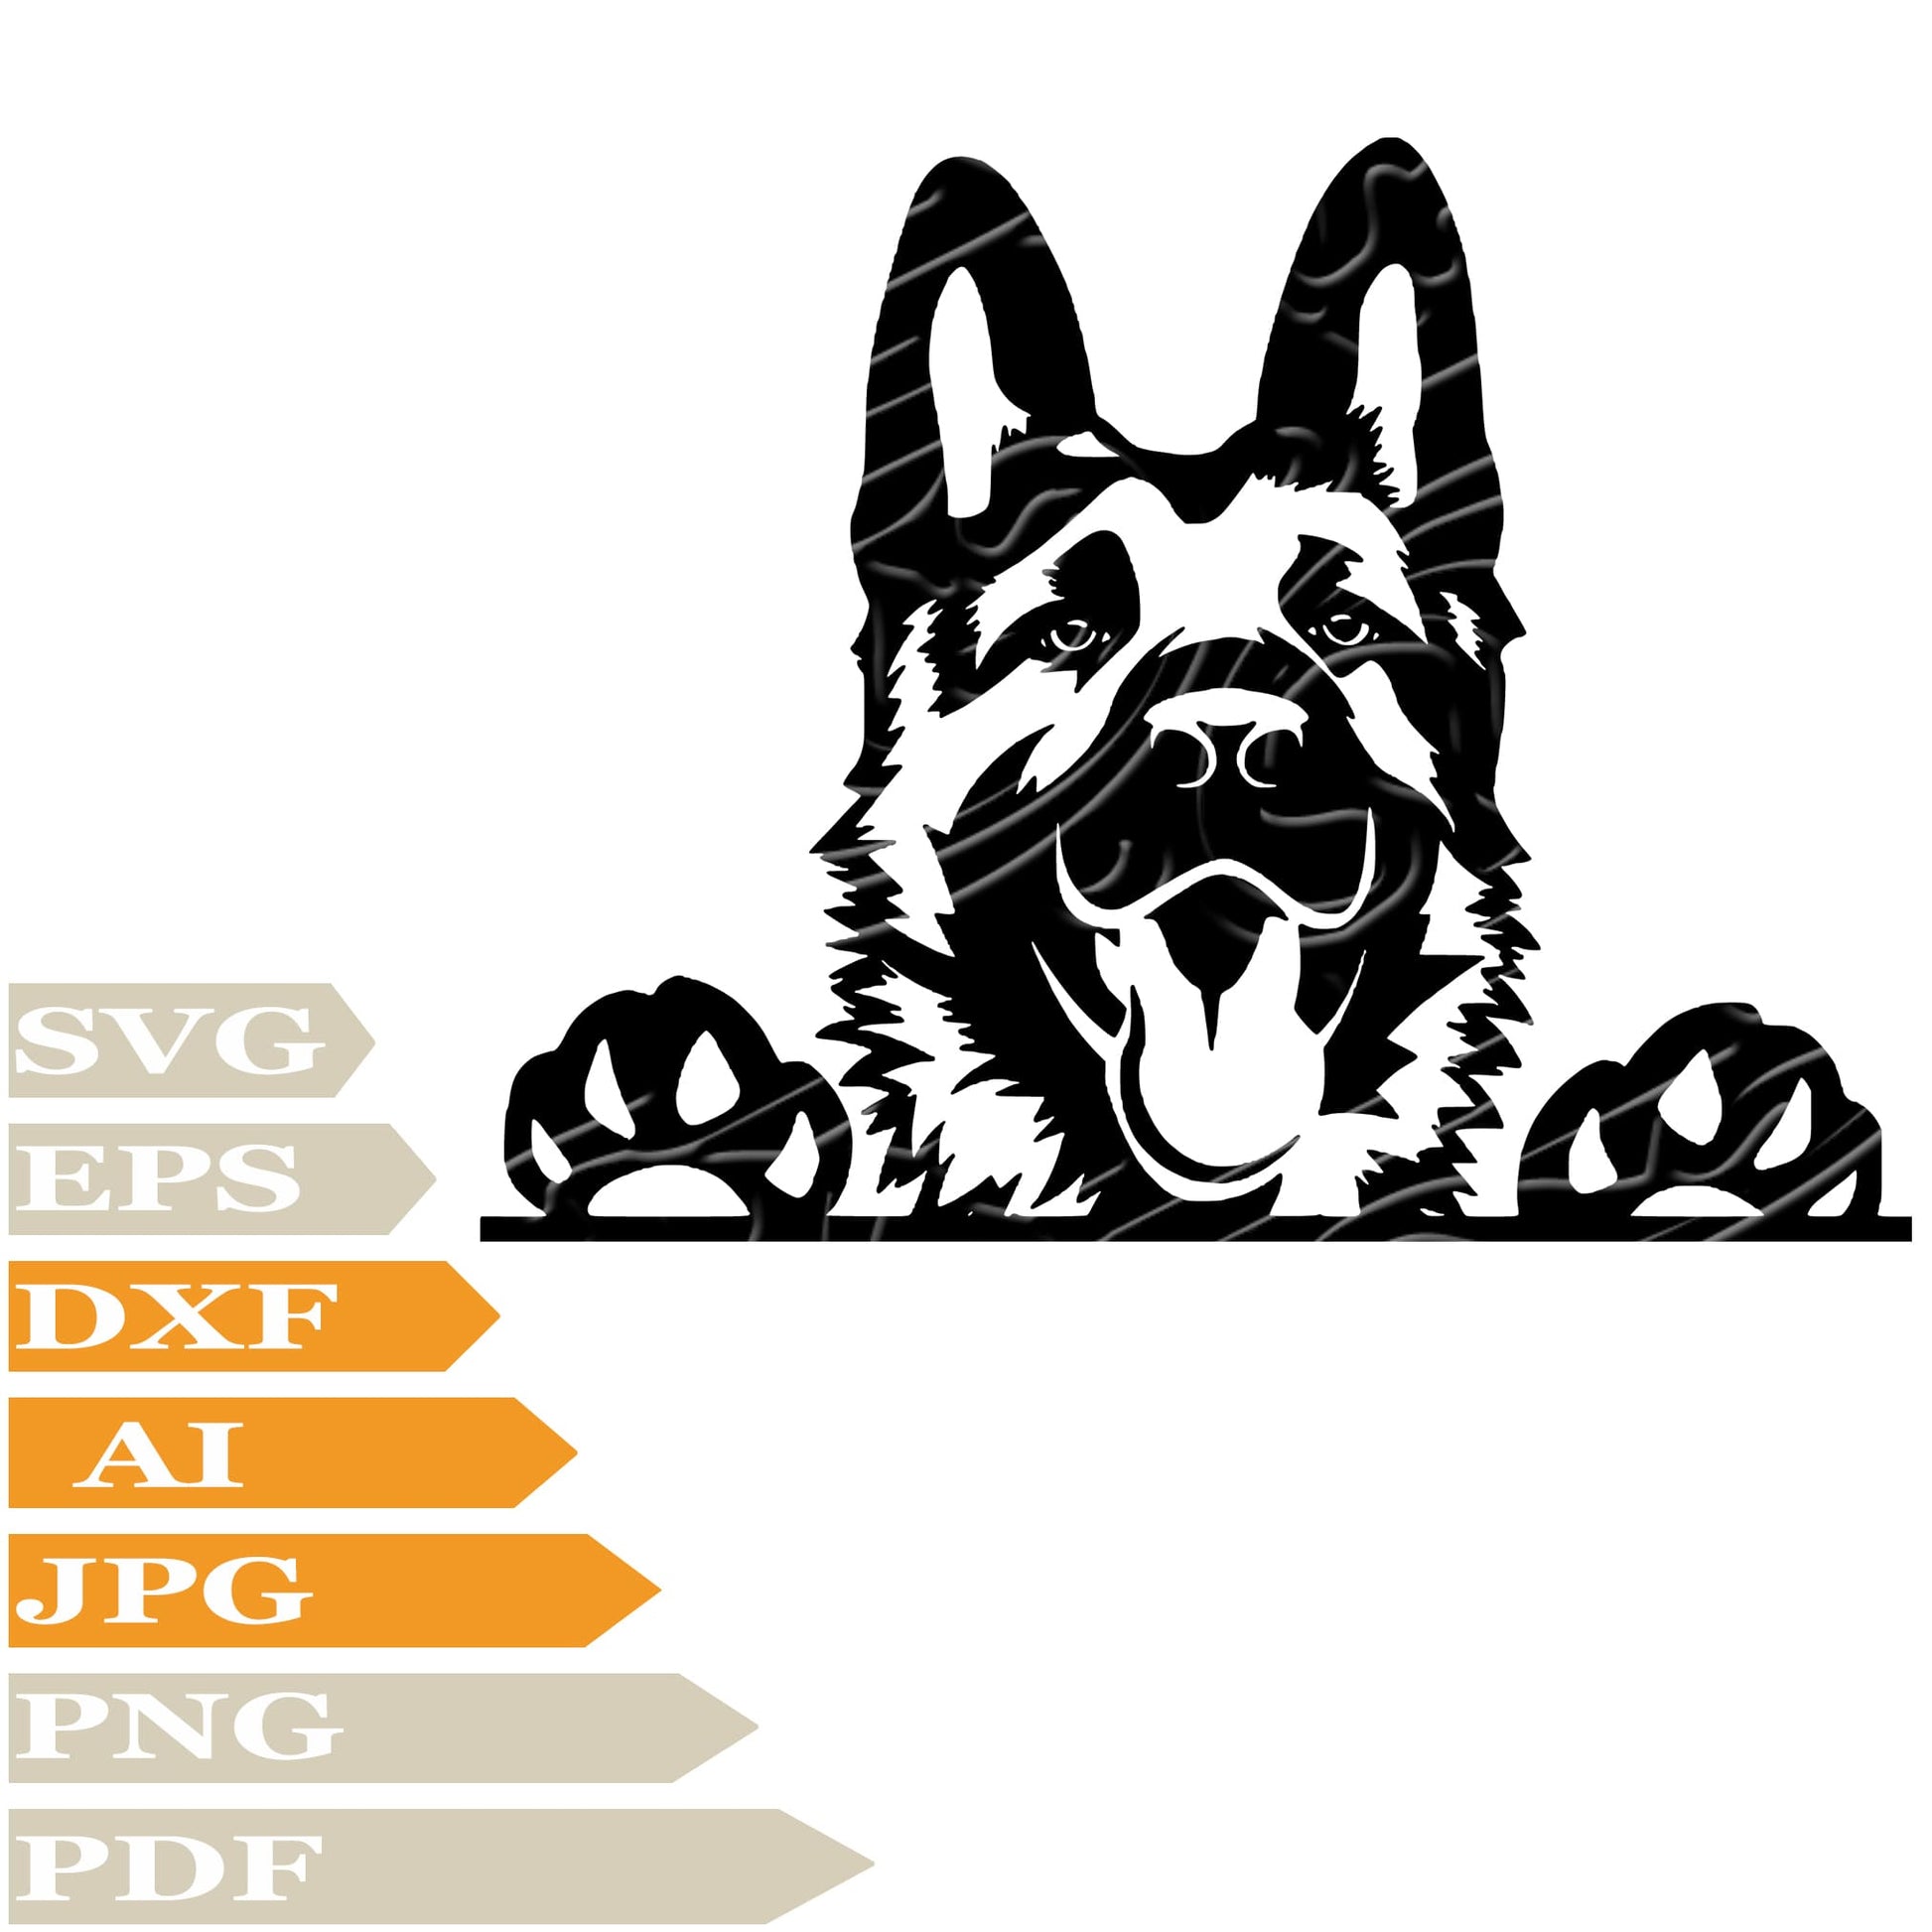 German Shepherdь German Shepherd With Paws Svg File, Image Cut, Png, For Tattoo, Silhouette, Digital Vector Download, Cut File, Clipart, For Cricut